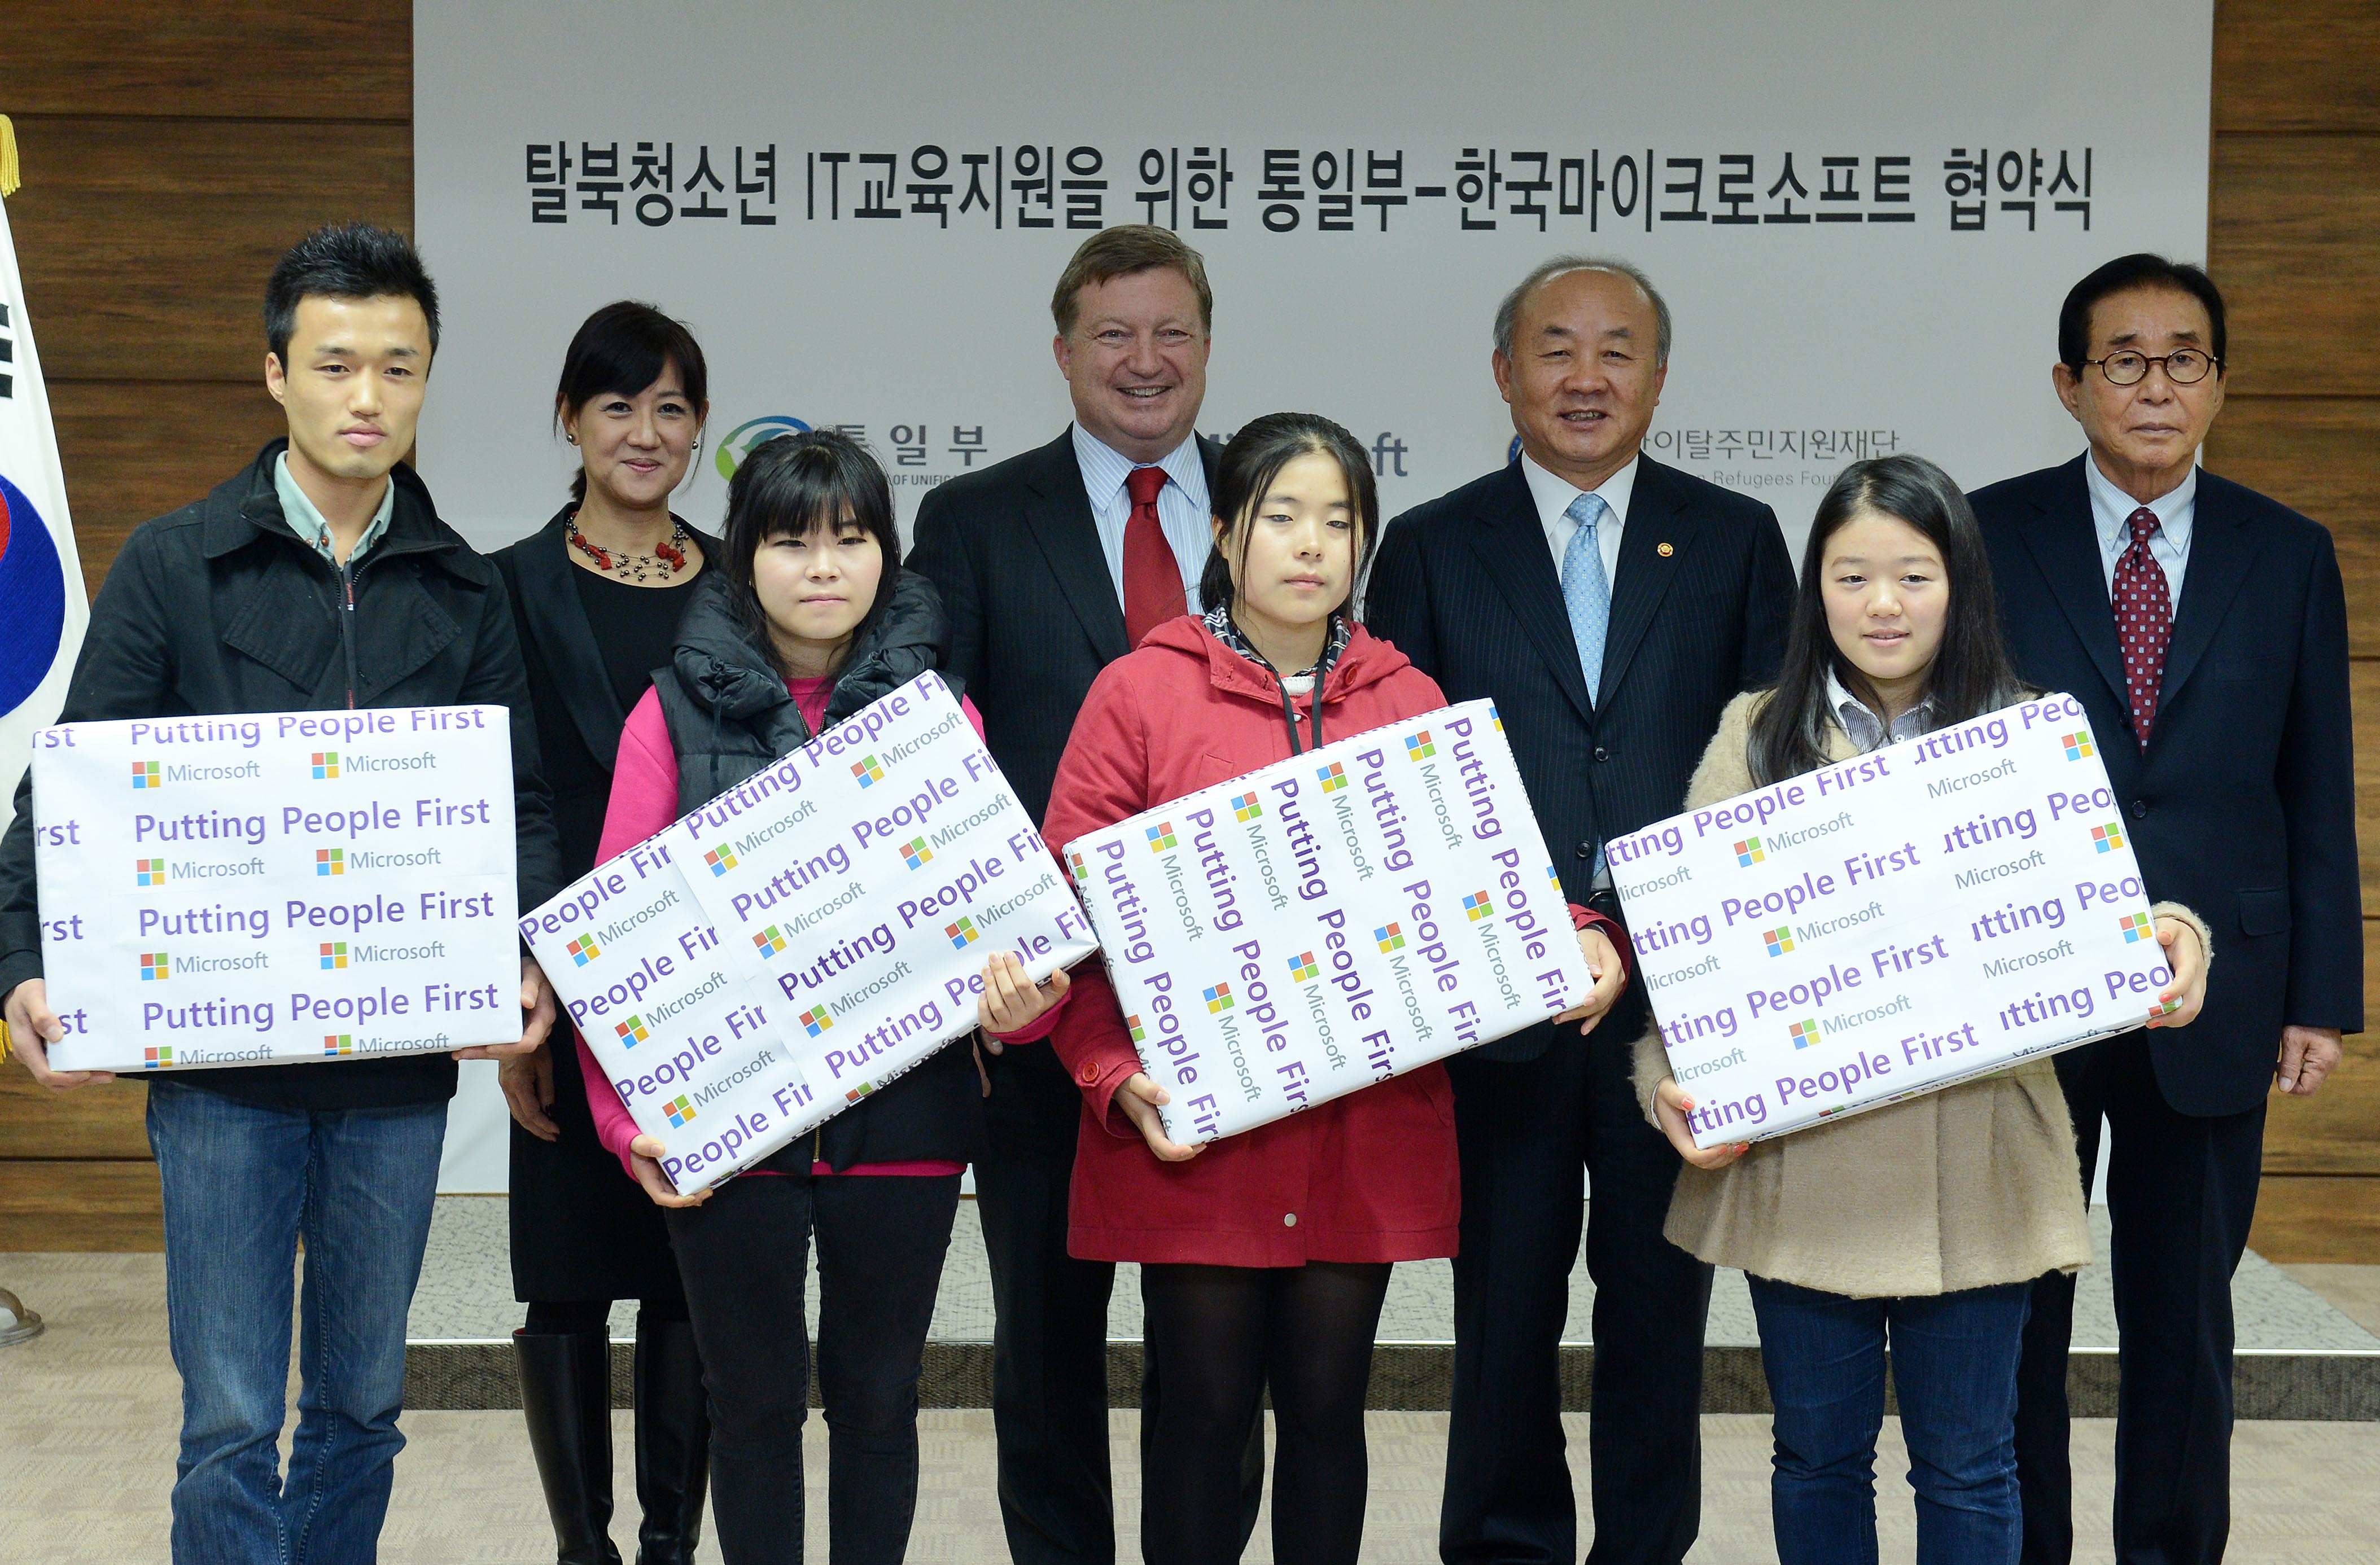 The MOU ceremony was attended by (back row, left to right) Sunny Park, Legal and Corporate Affairs Lead, Microsoft Korea; Craig Shank, Microsoft Vice President for International Government Affairs; Yu Woo-ik, South Korean Unification Minister; and Kim Il-joo, President of the North Korean Refugees Foundation